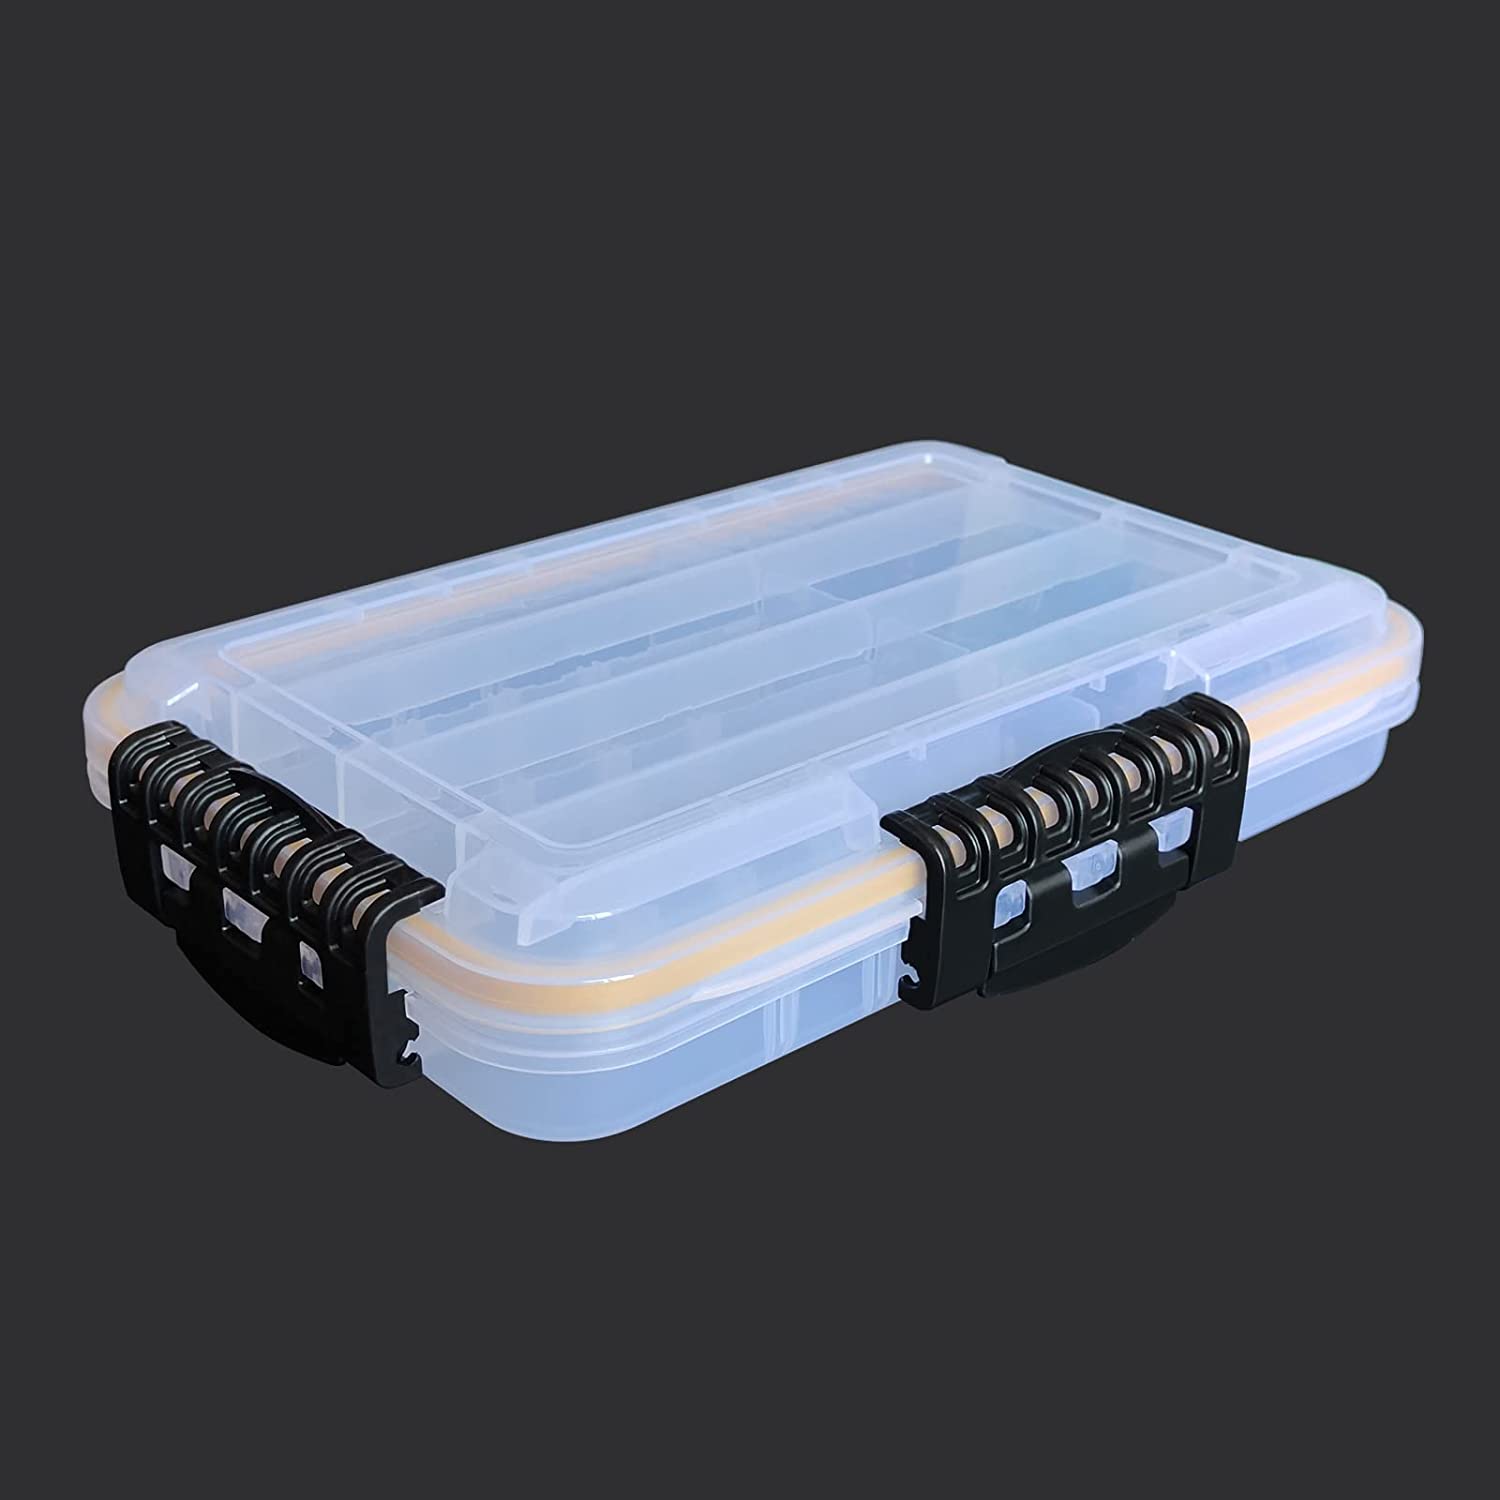 Beoccudo 3600 Tackle Box Organizer Plastic Storage Boxes & Trays with Removable Dividers Clear Fishing Lure Container